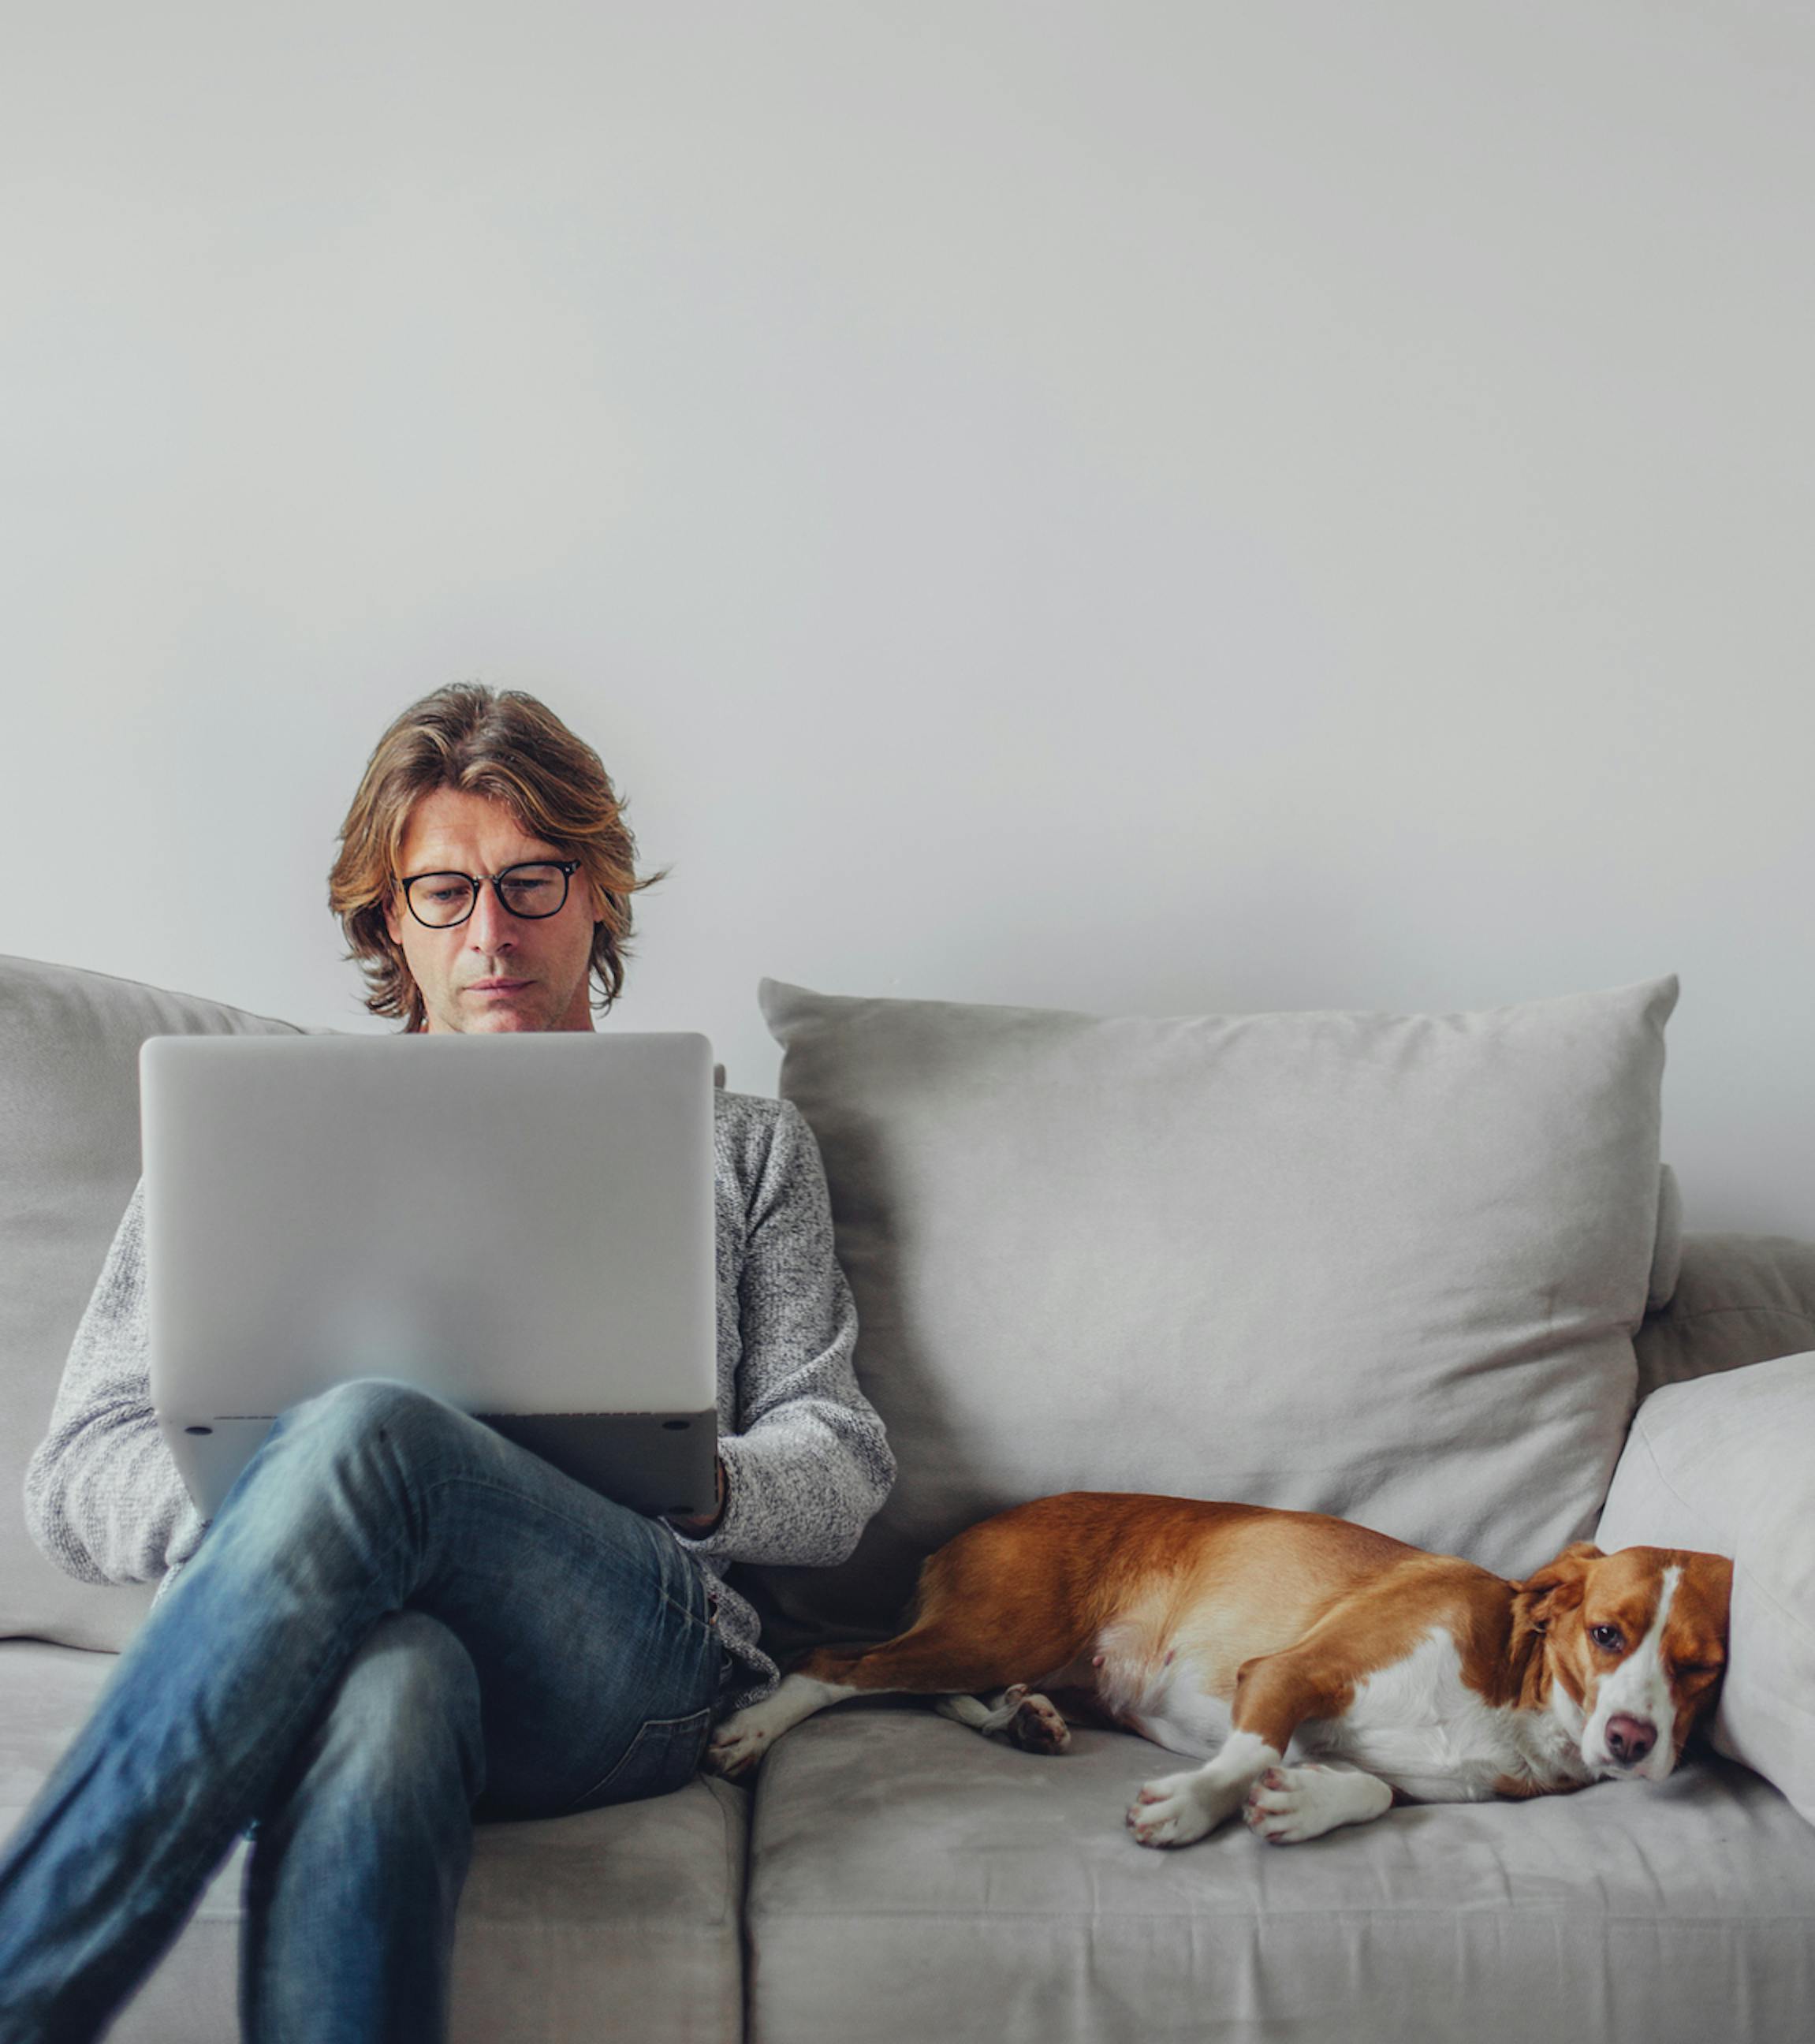 Man with laptop and dog on couch